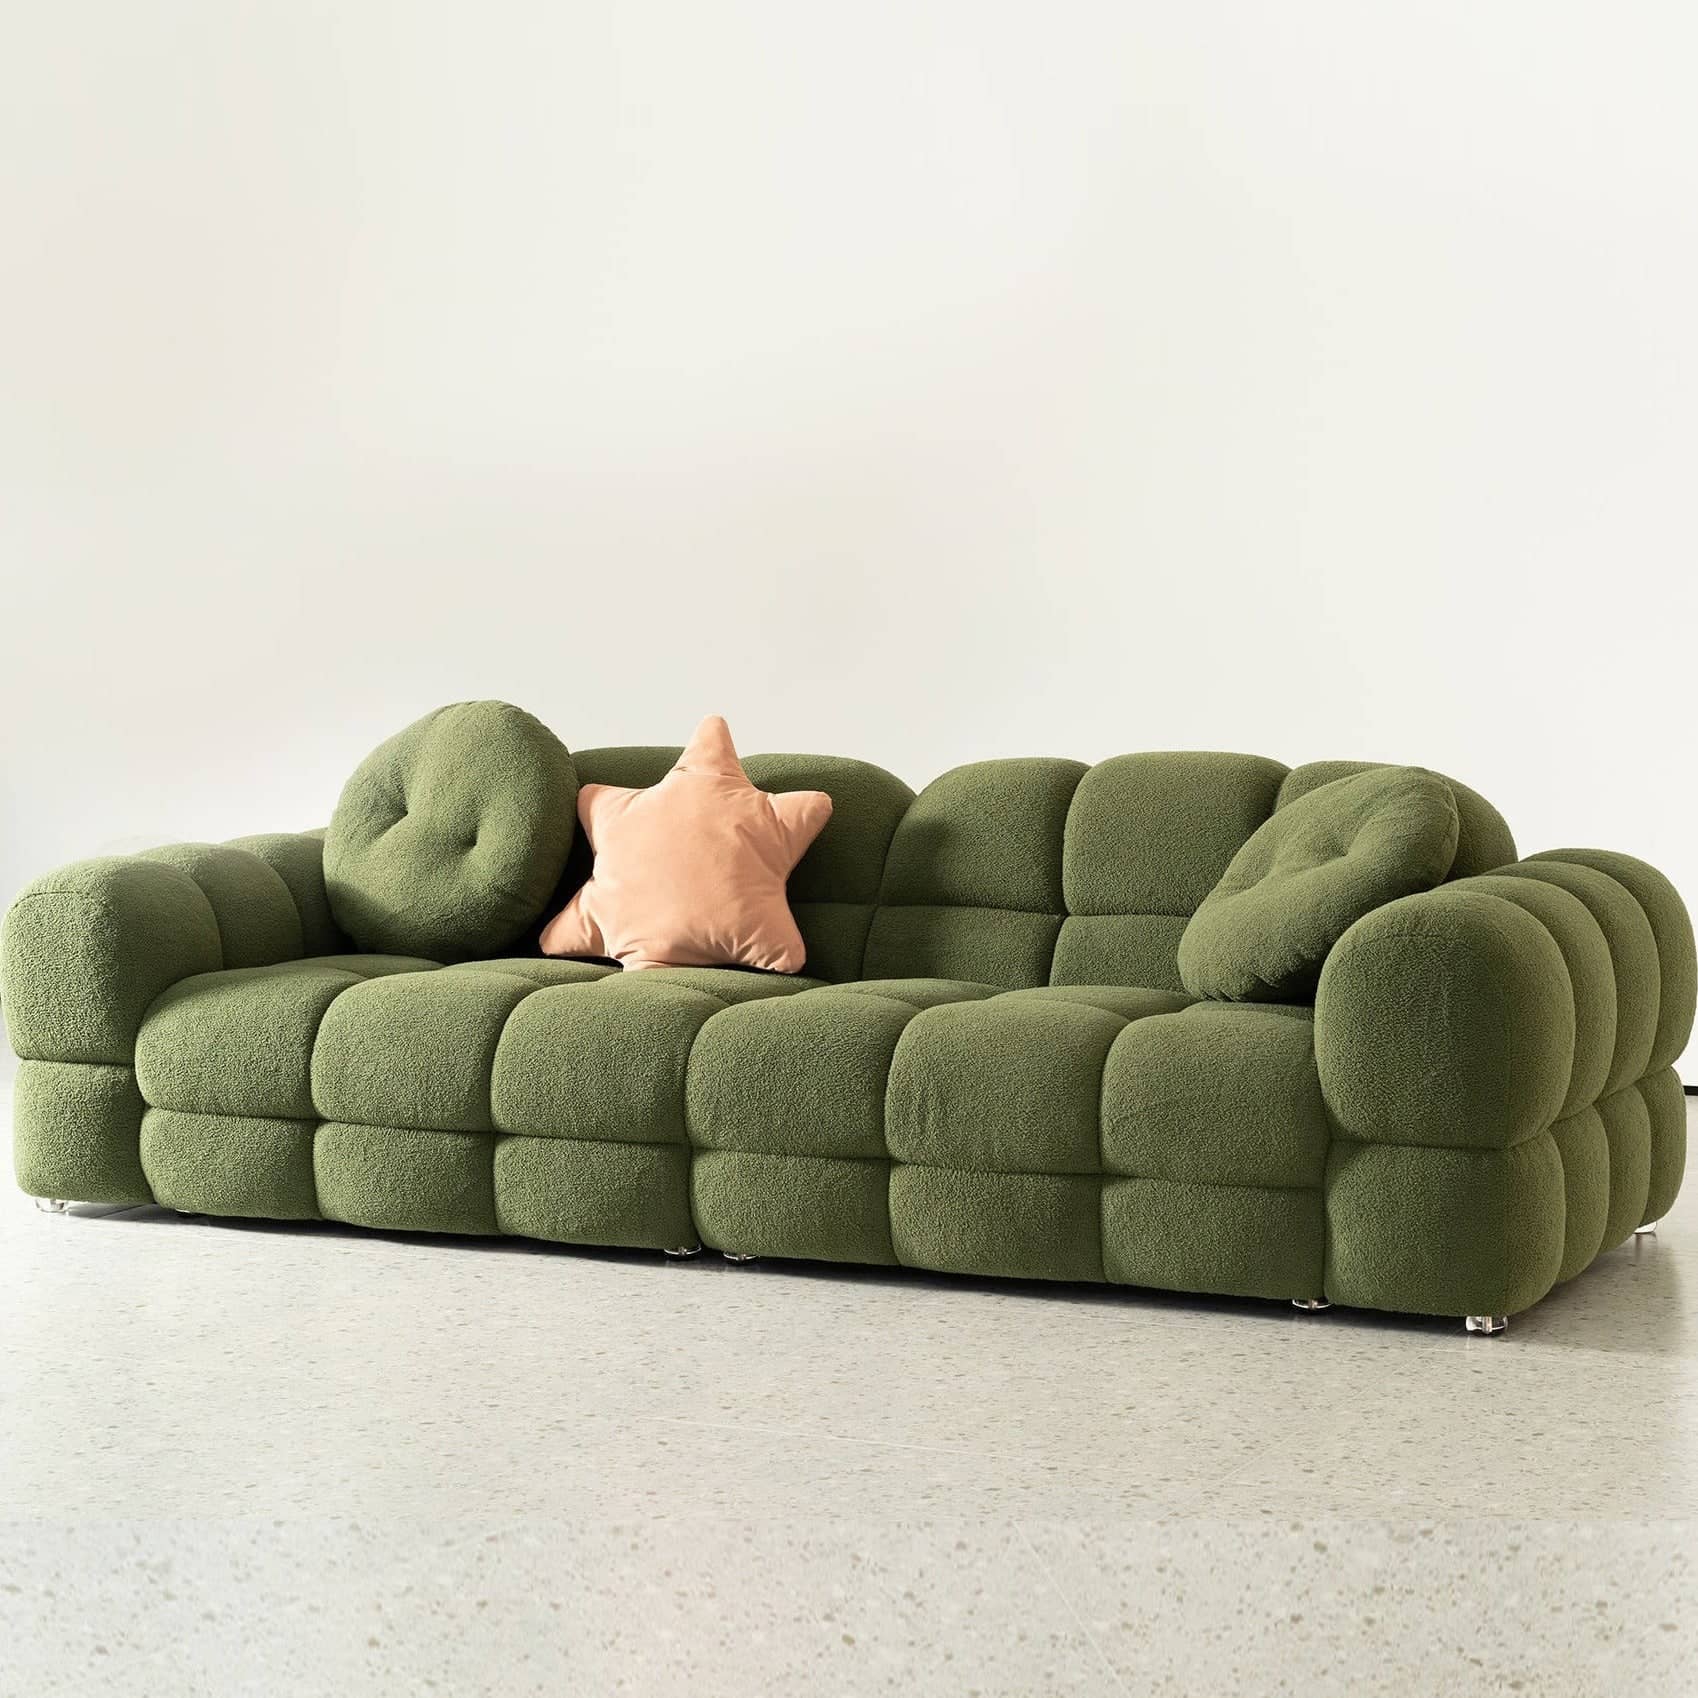 rookie bomuld Mordrin Get now a sofa with a modern, luxurious design – homznia